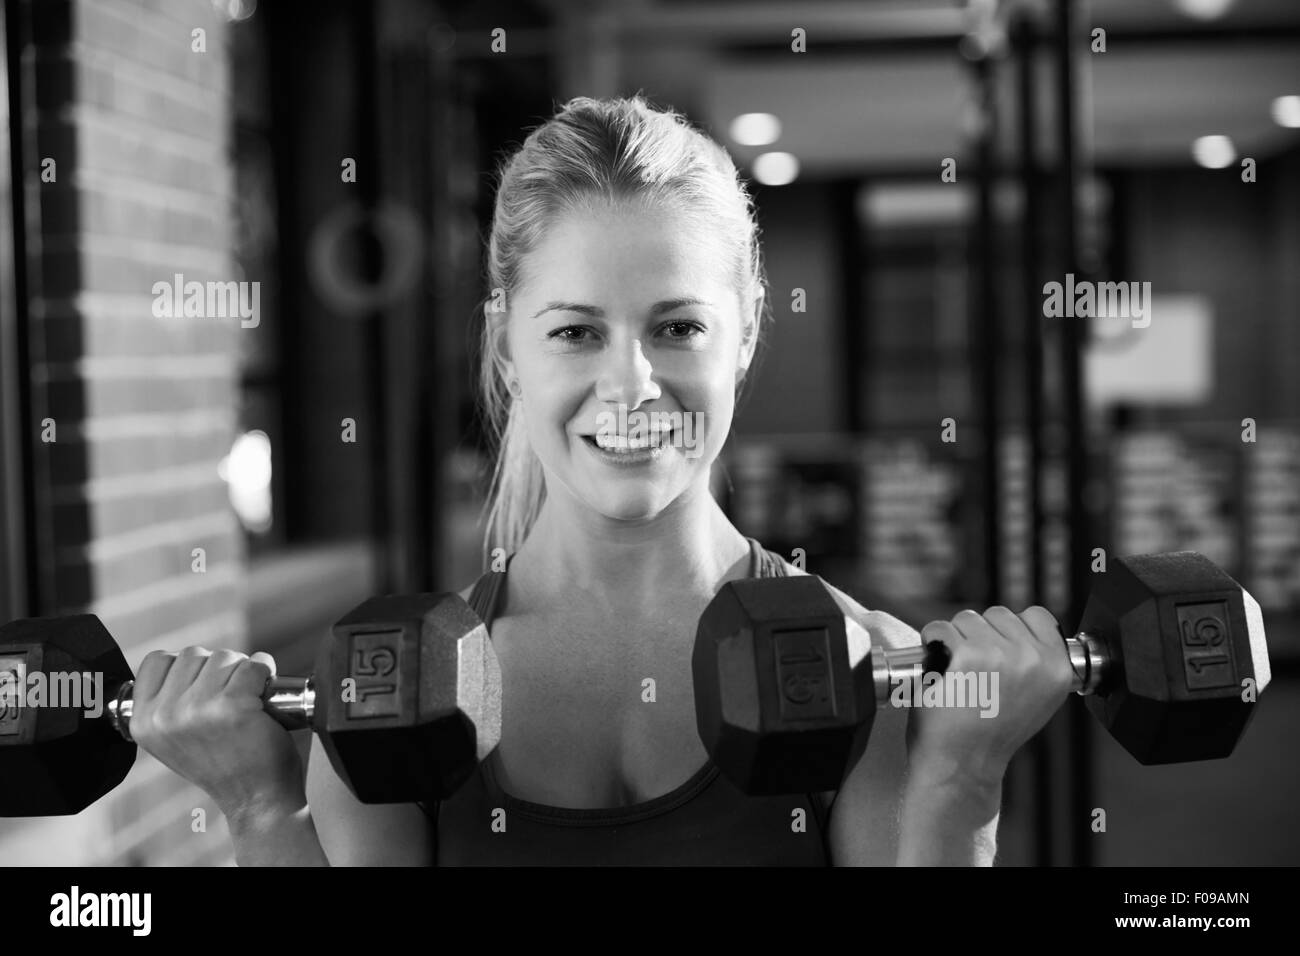 Black And White Shot Of Woman In Gym Lifting Hand Weights Stock Photo